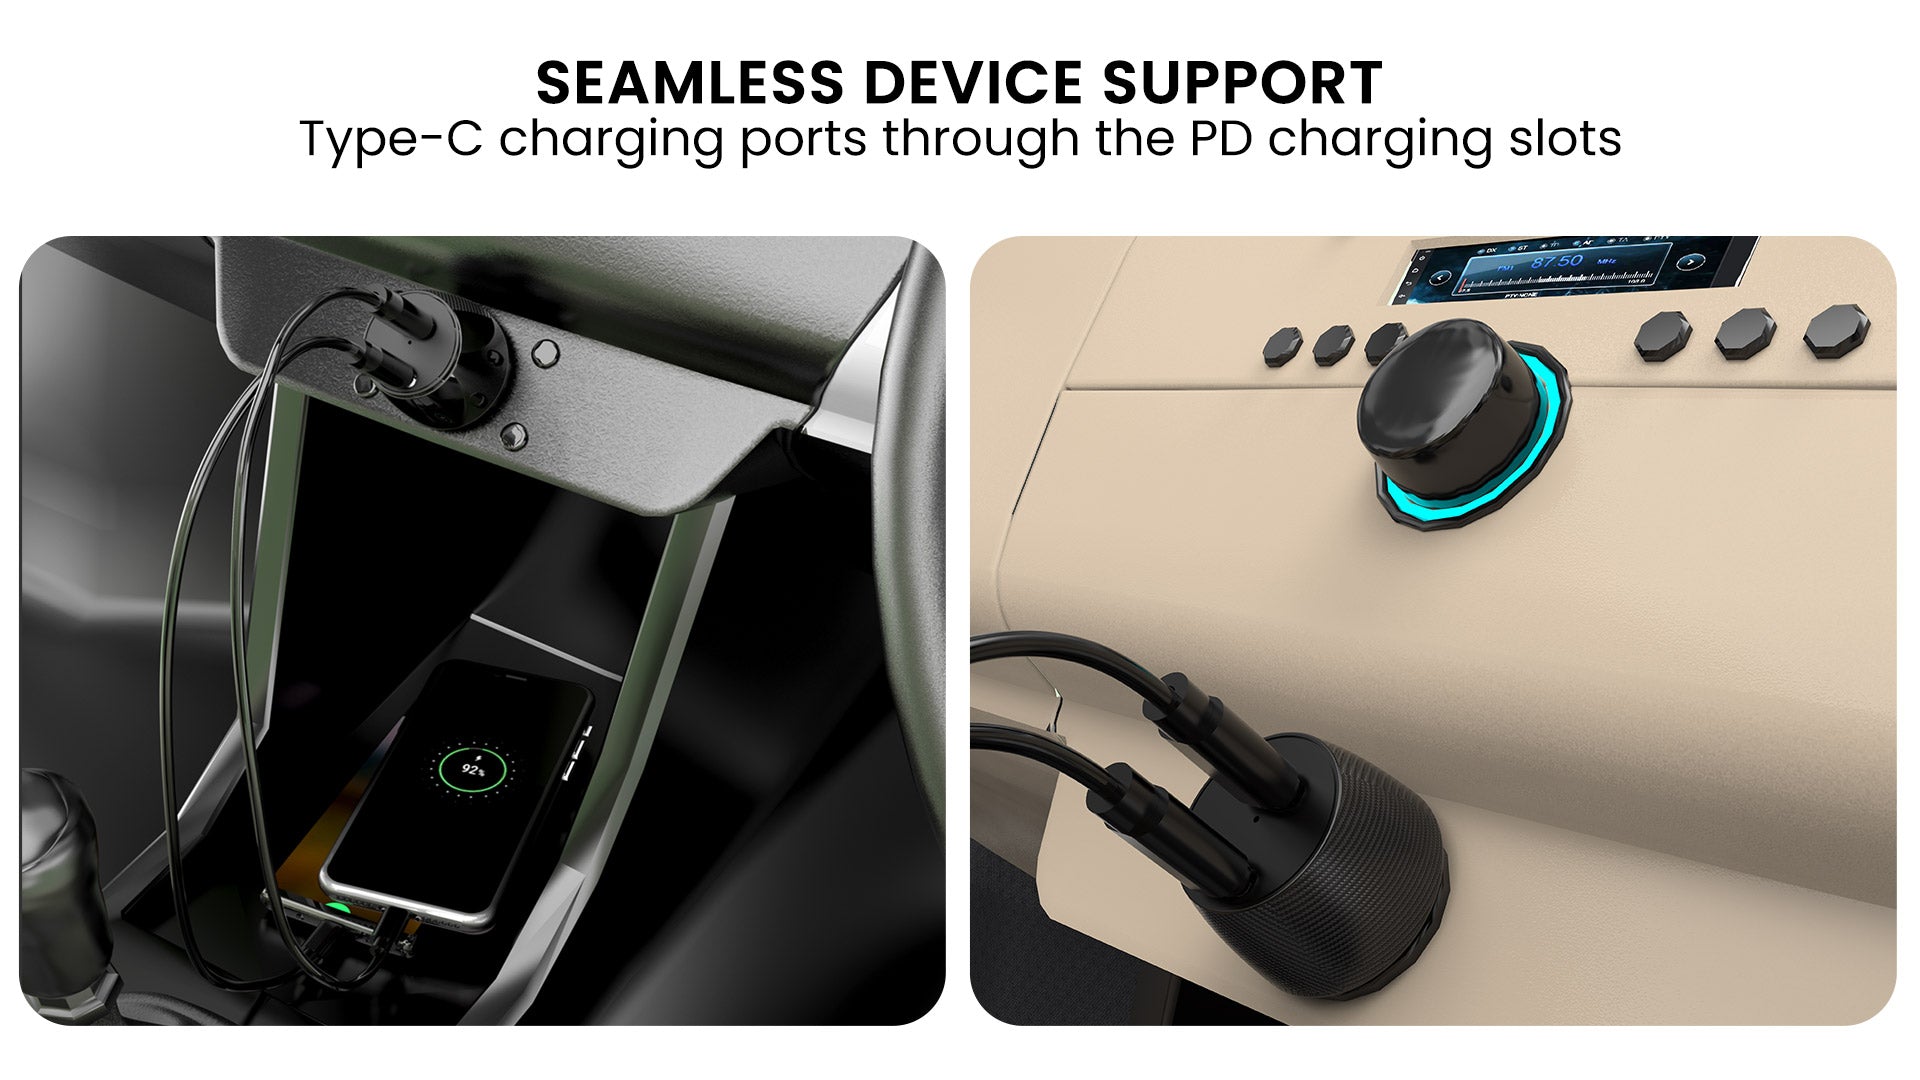 Fast charging support